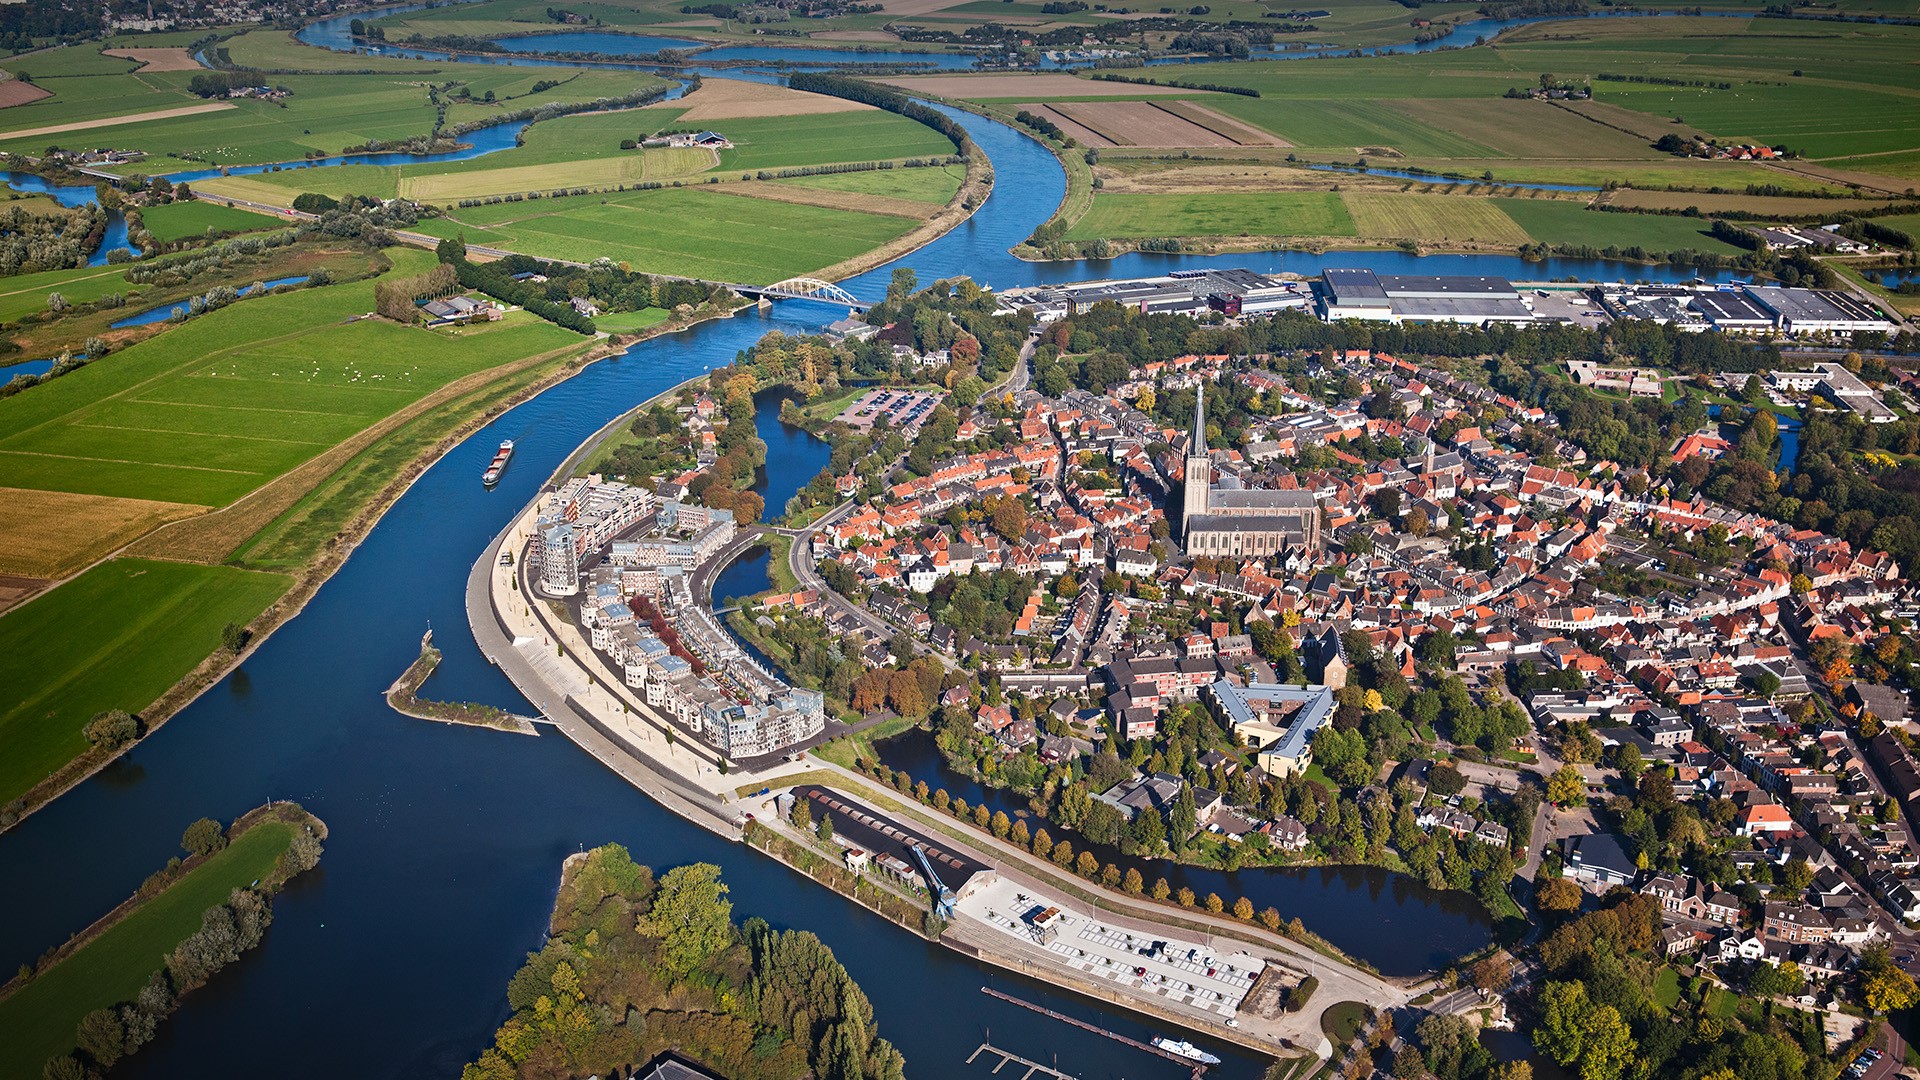 The 10 most beautiful villages and towns in the Netherlands